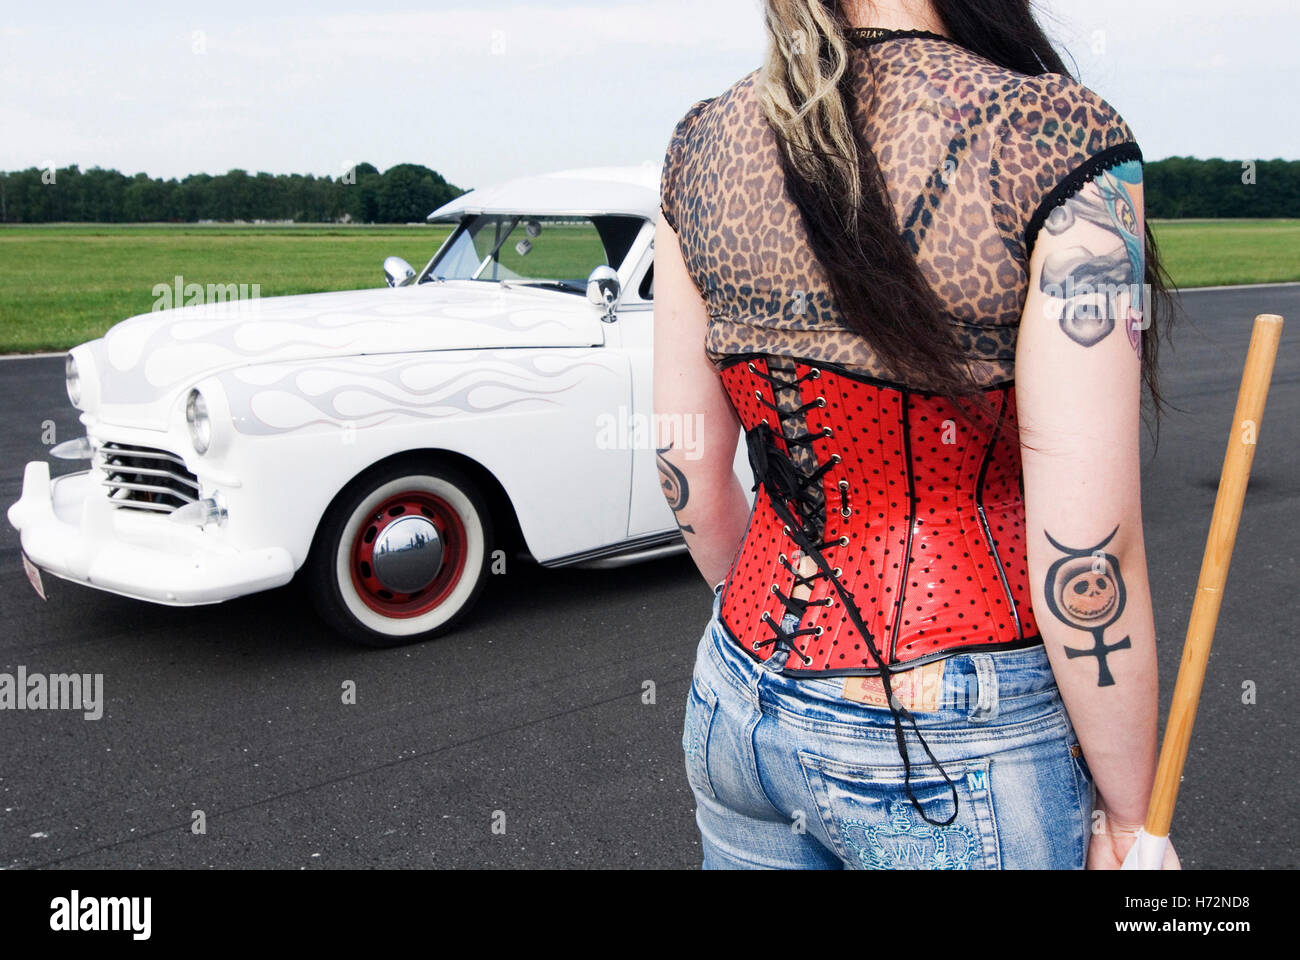 Starter girl with a red corsage and tattoos next to a white limousine, Hot Rods, Kustoms, Cruisers & Art at the 'Bottrop Kustom Stock Photo